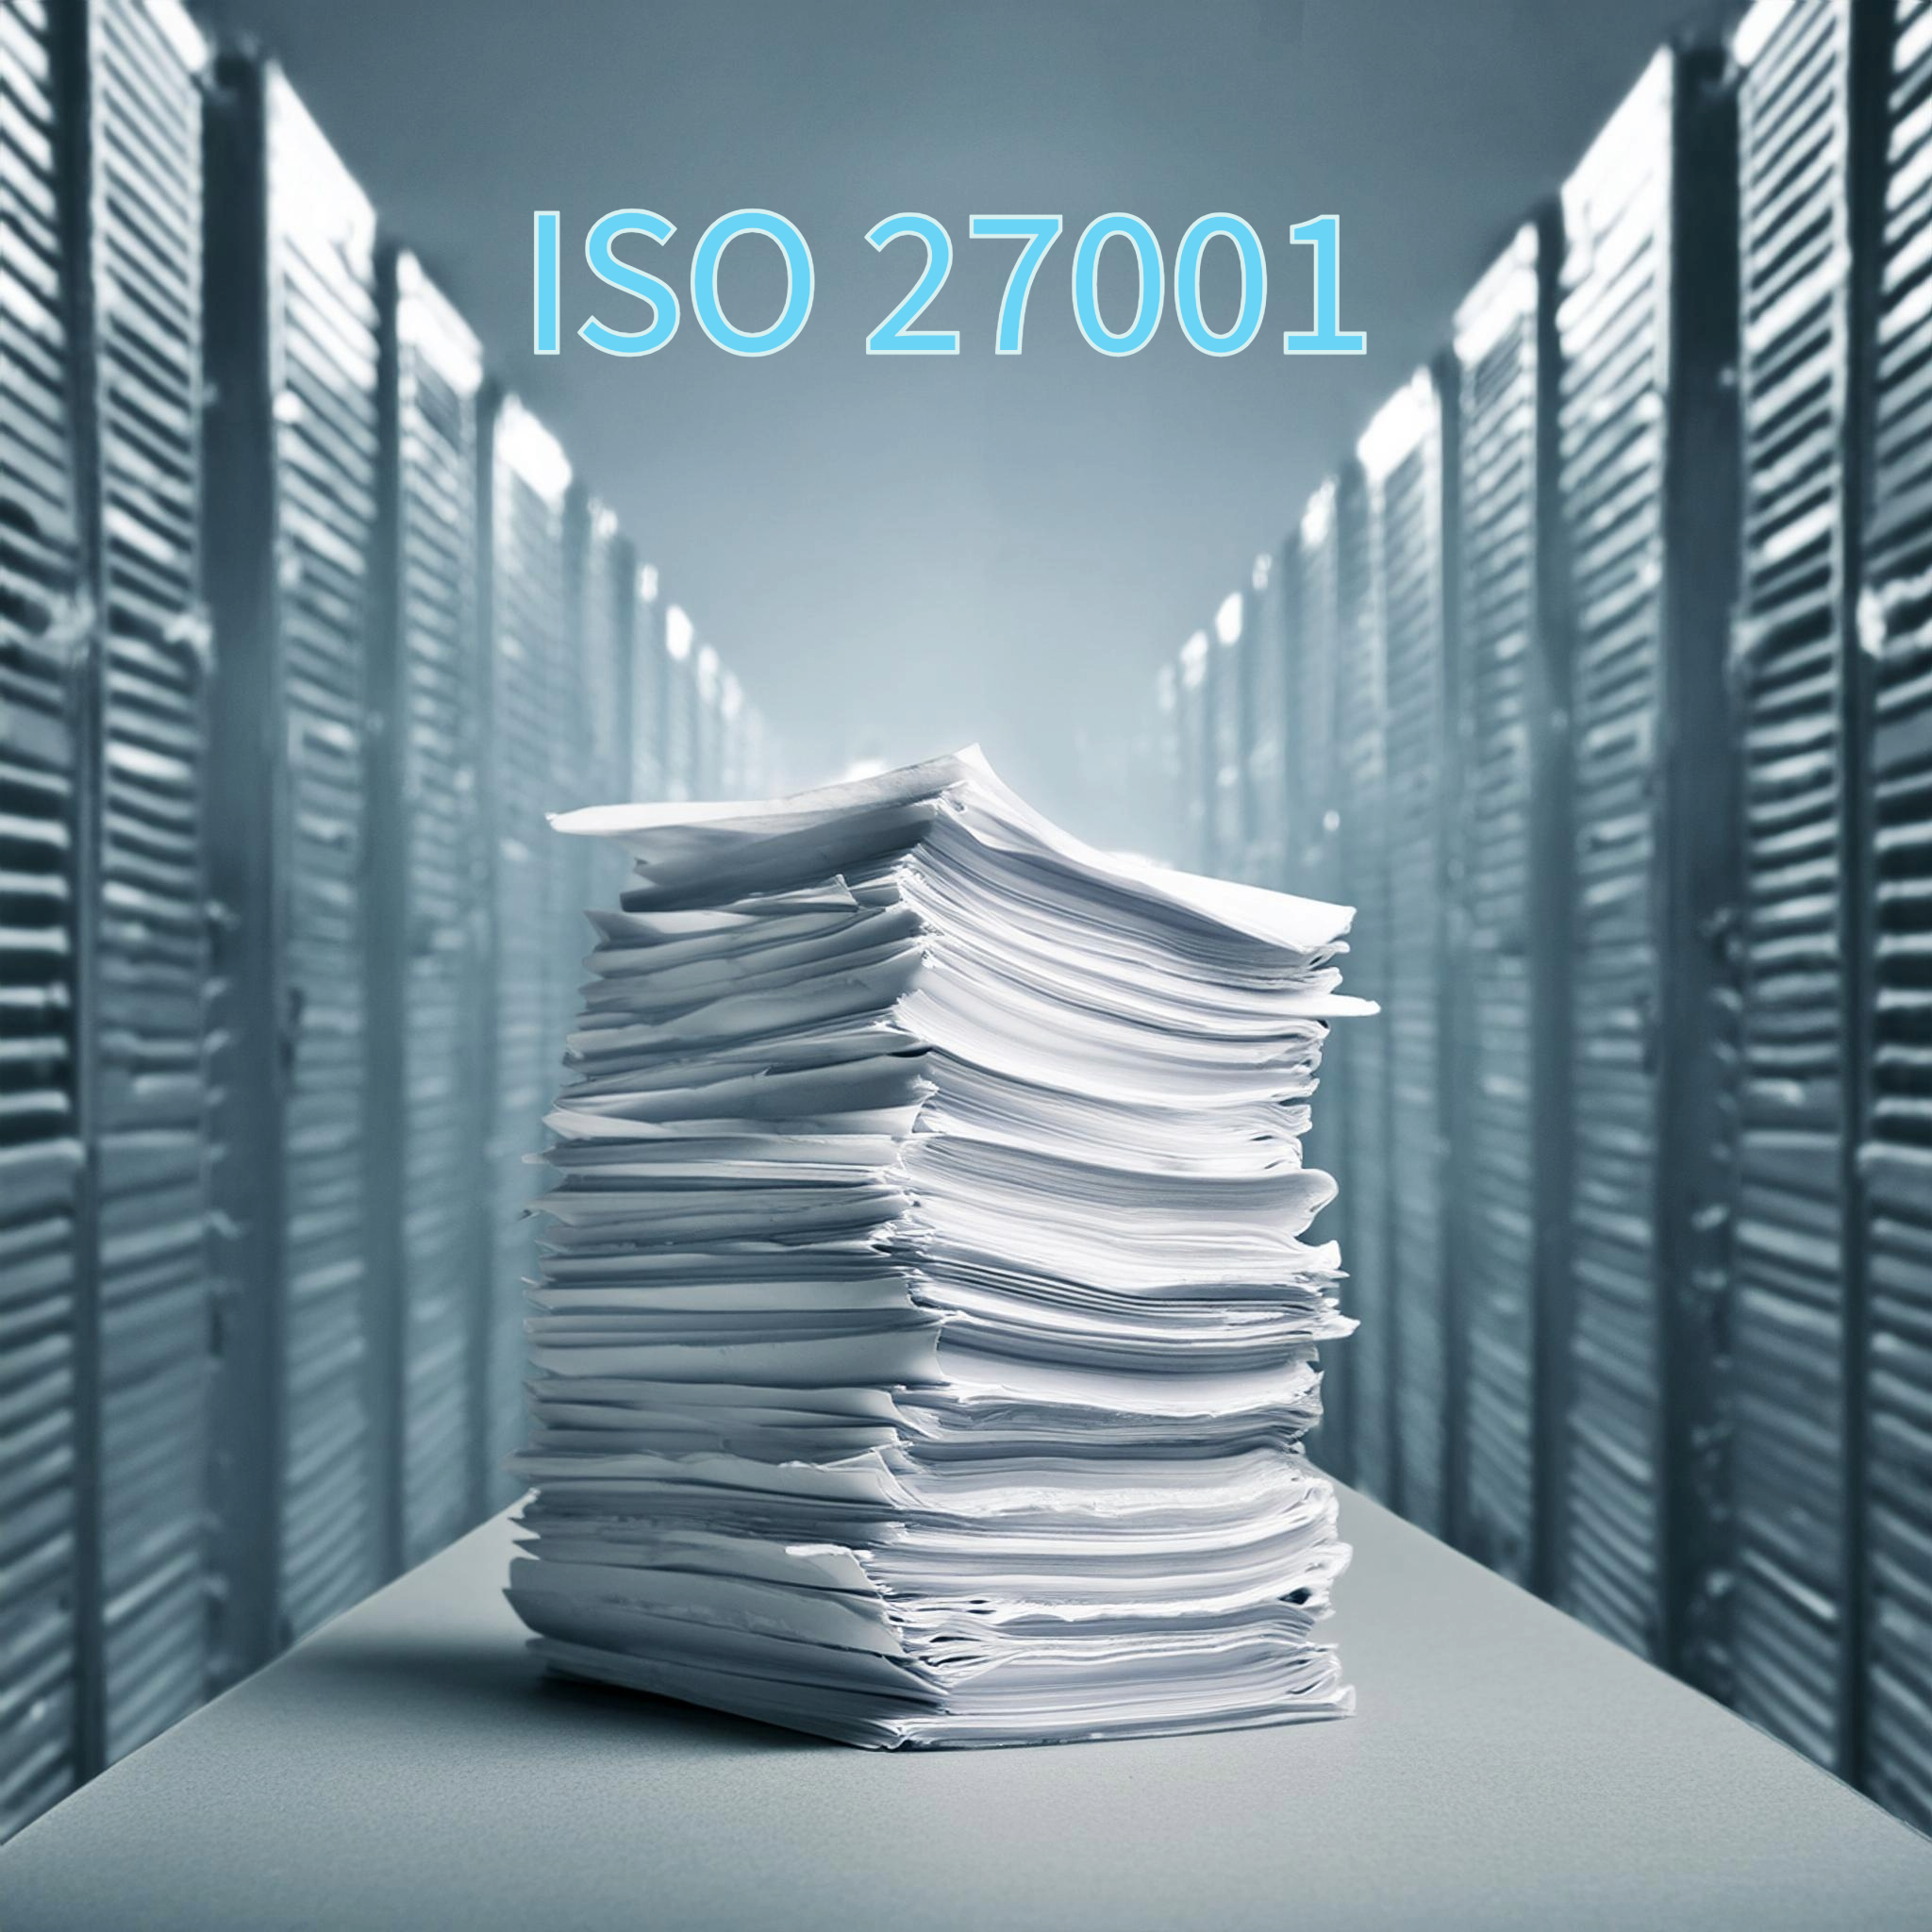 A stack of documents labeled "ISO 27001" in a secure data storage facility.